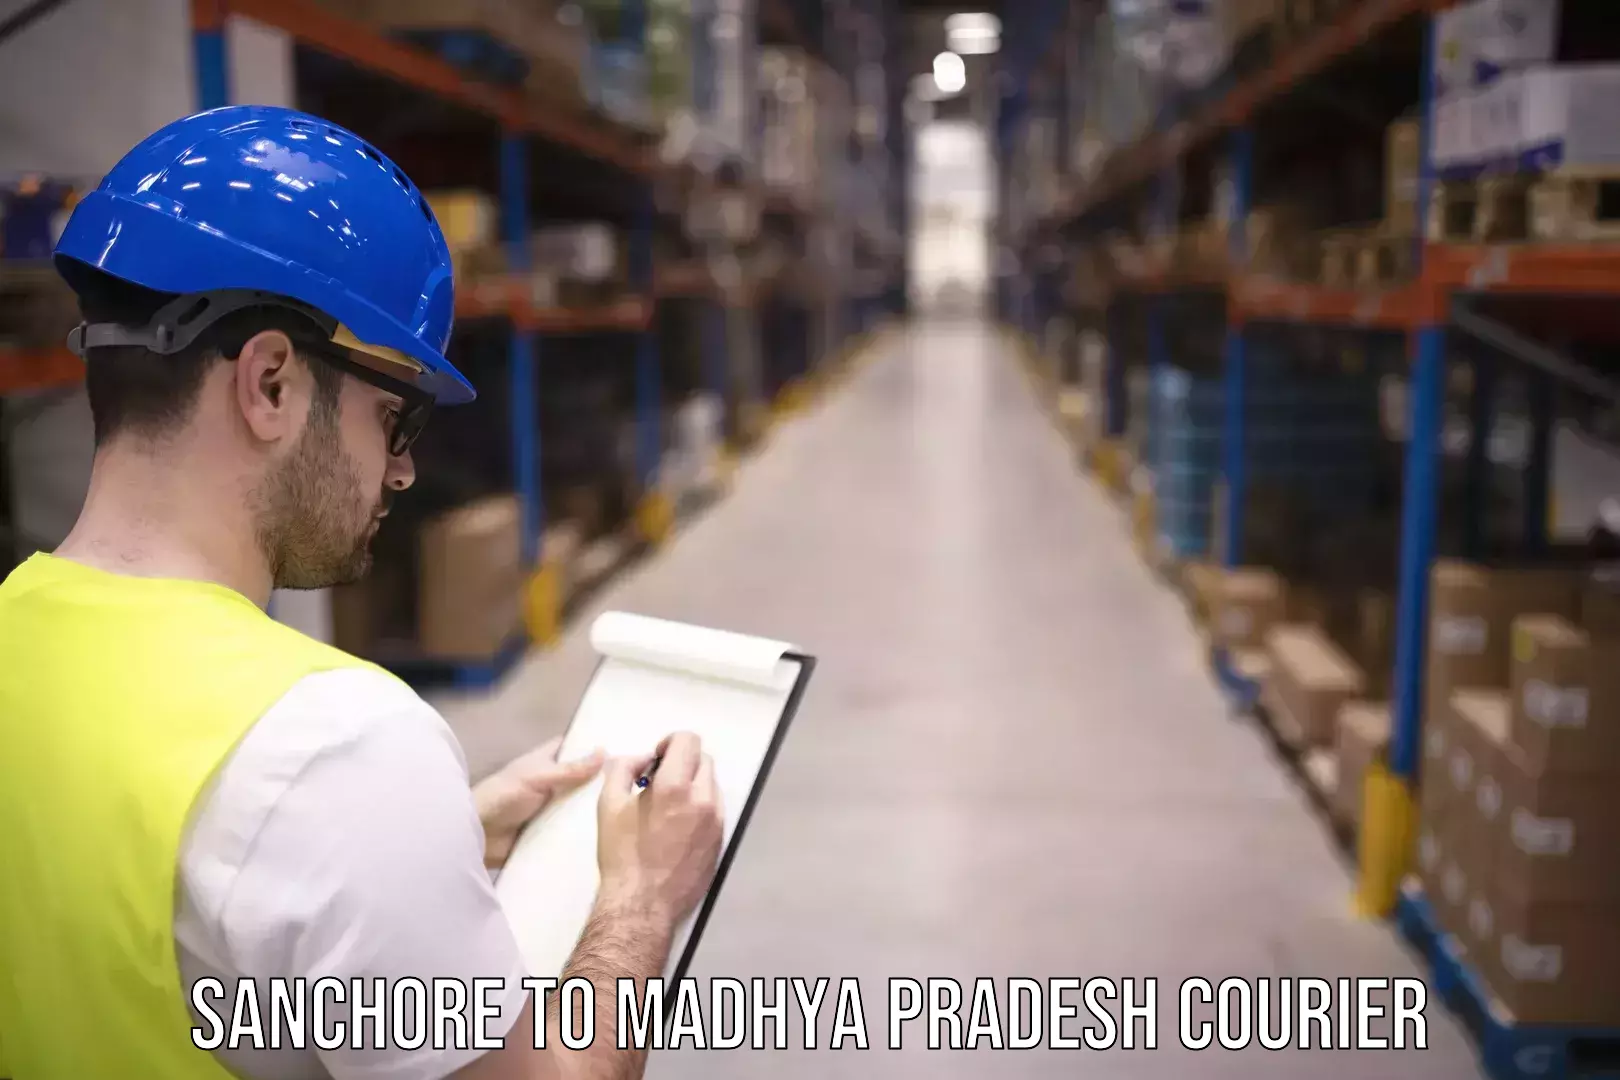 State-of-the-art courier technology Sanchore to Deosar